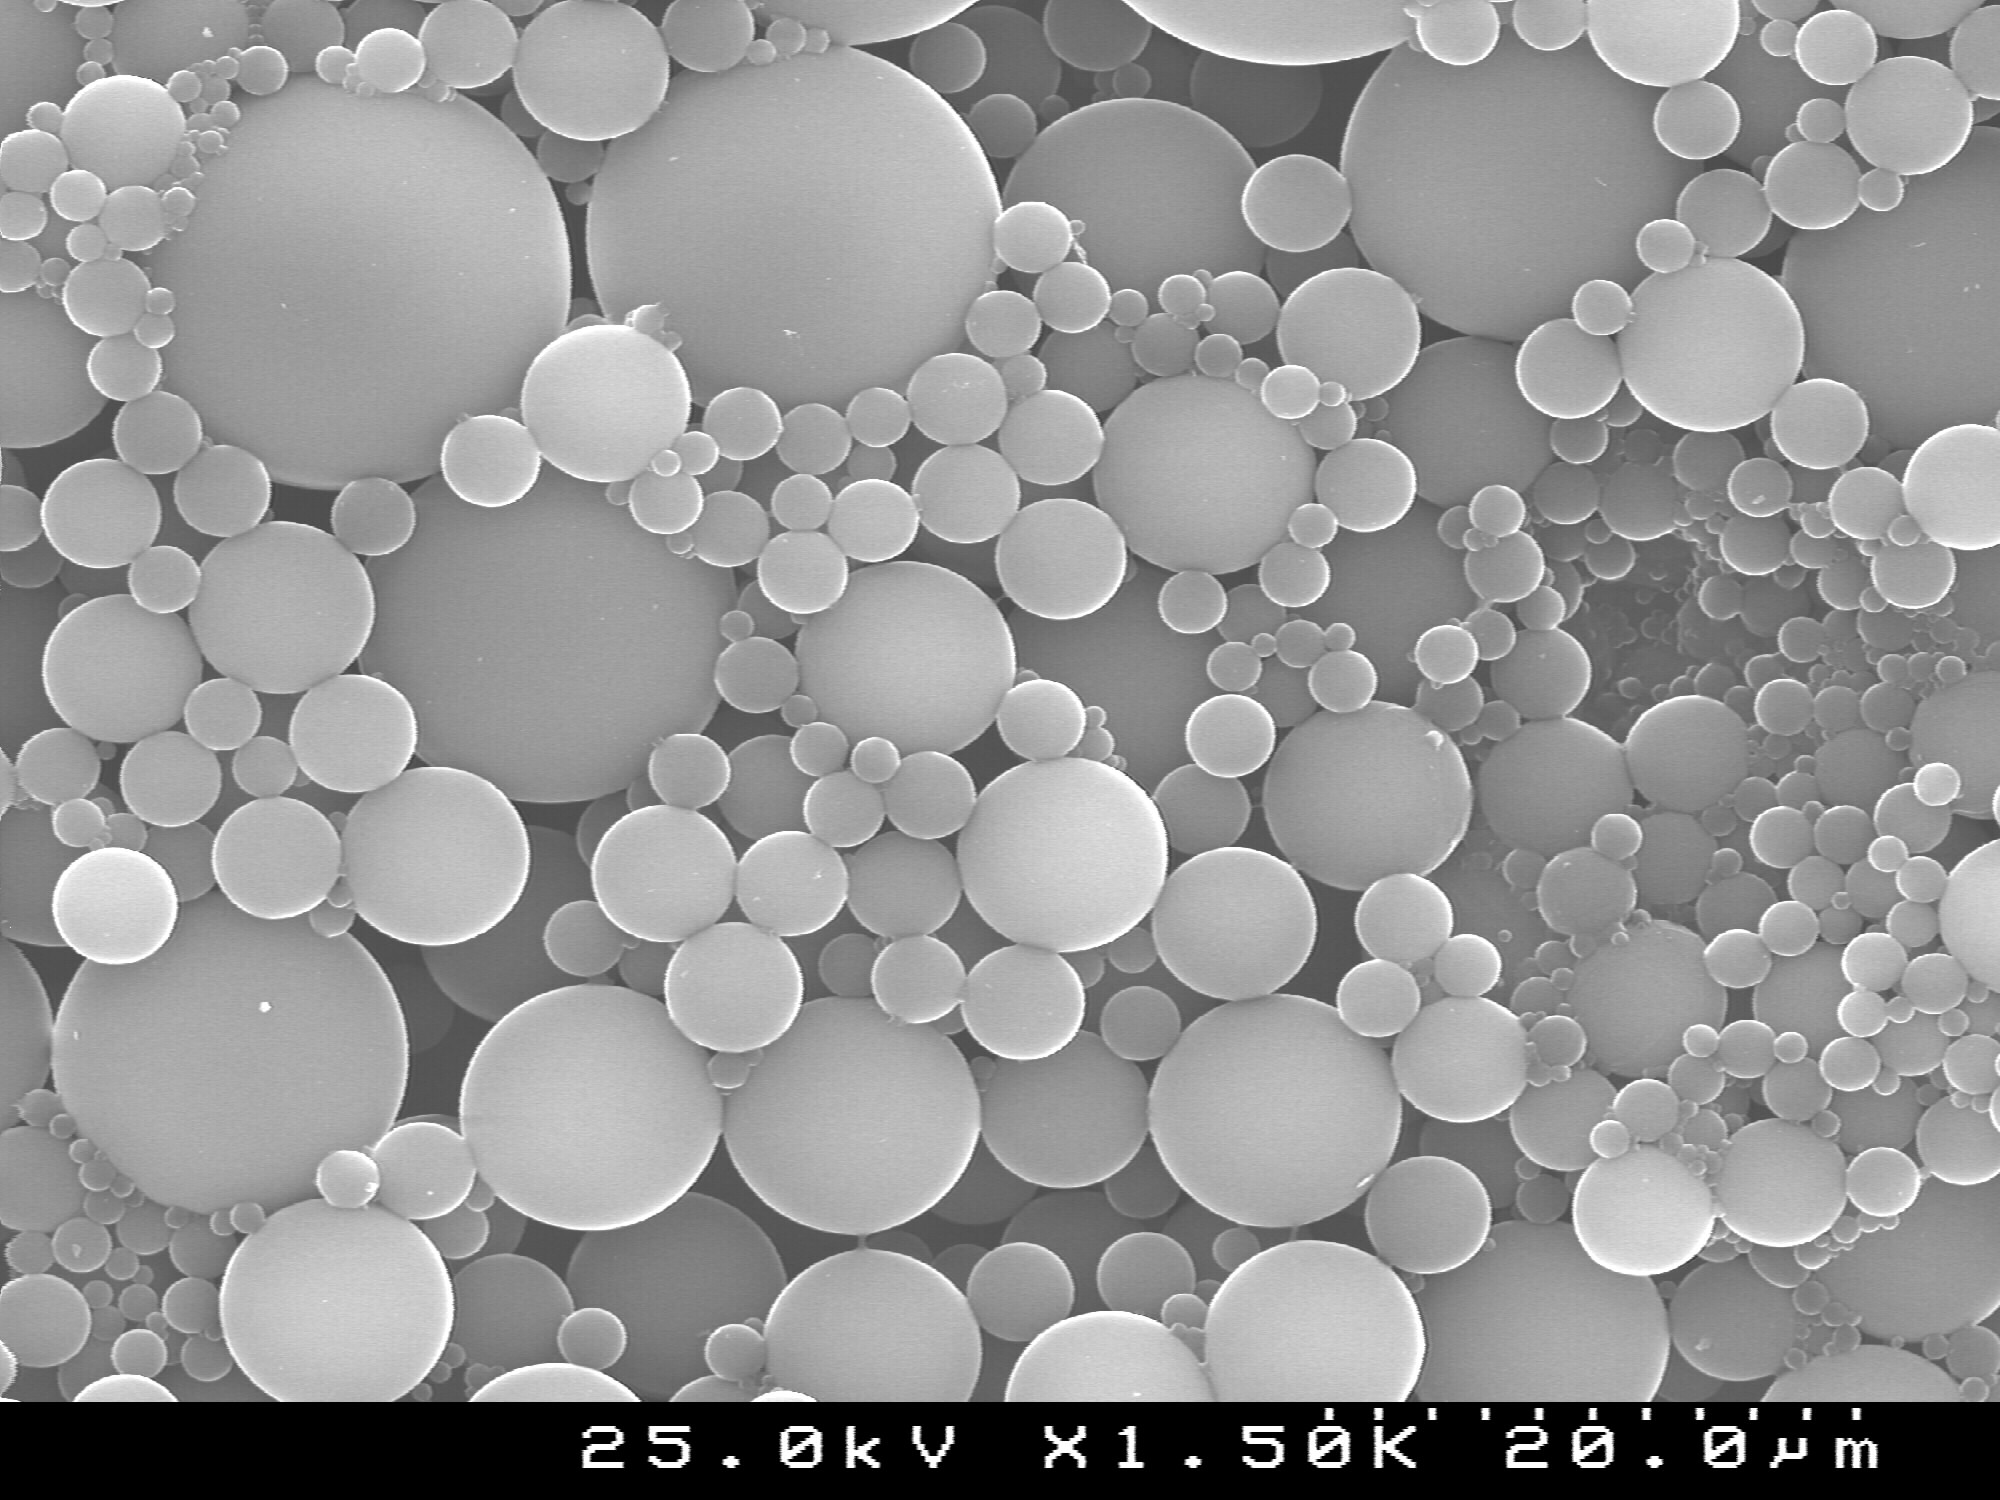 SEM picture of polymeric microcapsules loaded with corrosion inhibitor produced by Smallmatek at pilot scale.